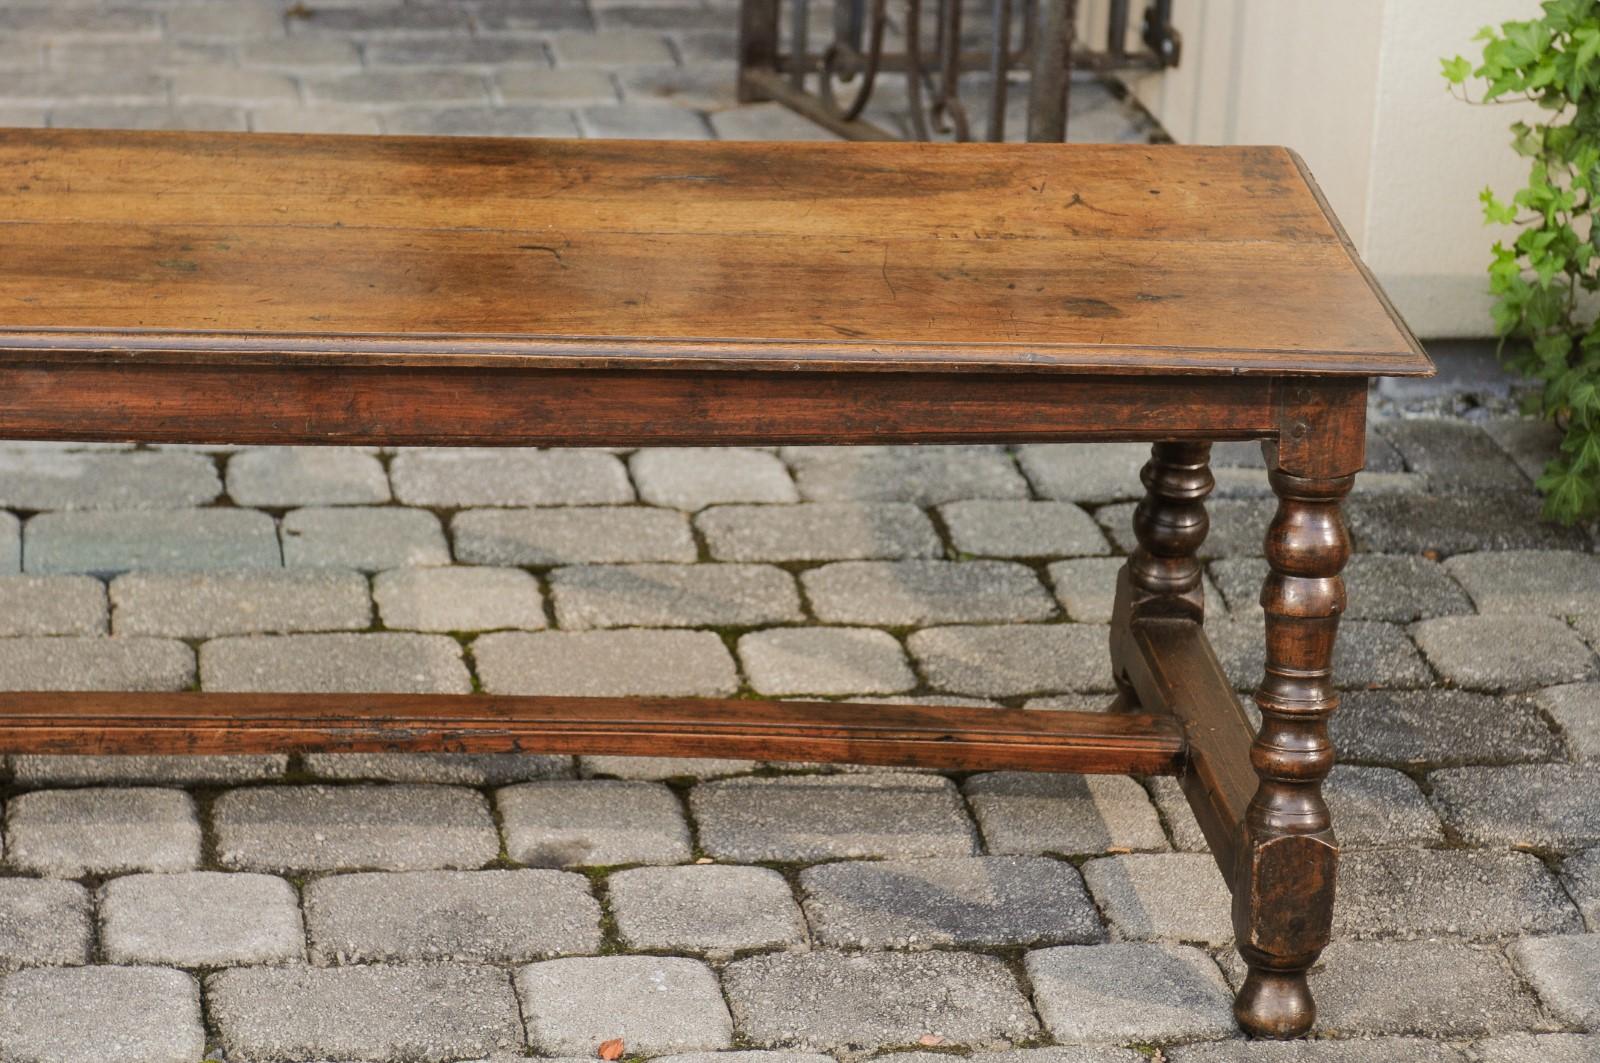 Italian 1800s Walnut Bench with Turned Legs and H-Form Cross Stretcher 8